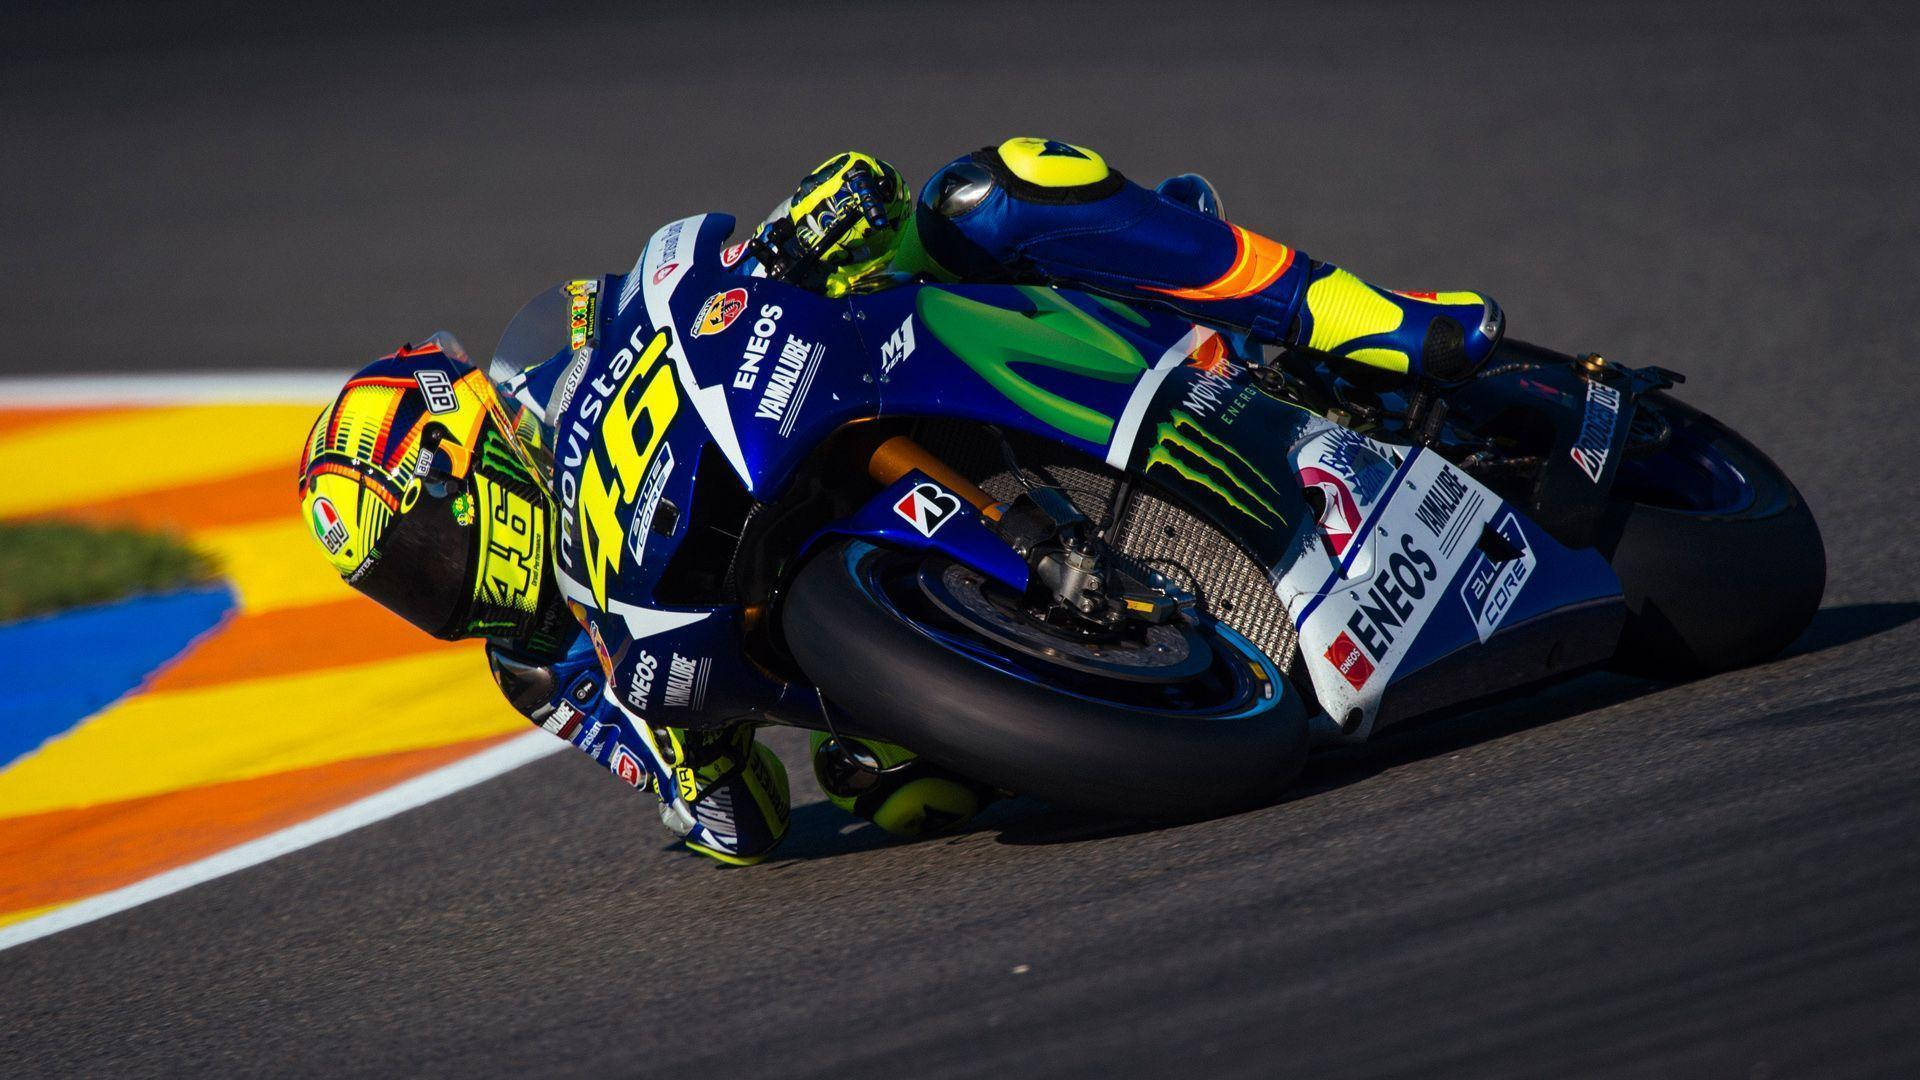 Valentinorossi Bankar Motorcykel – This Could Be A Potential Translation, But It Doesn't Quite Make Sense. A Better Translation Would Be Valentino Rossi På En Bankande Motorcykel, Which Means 